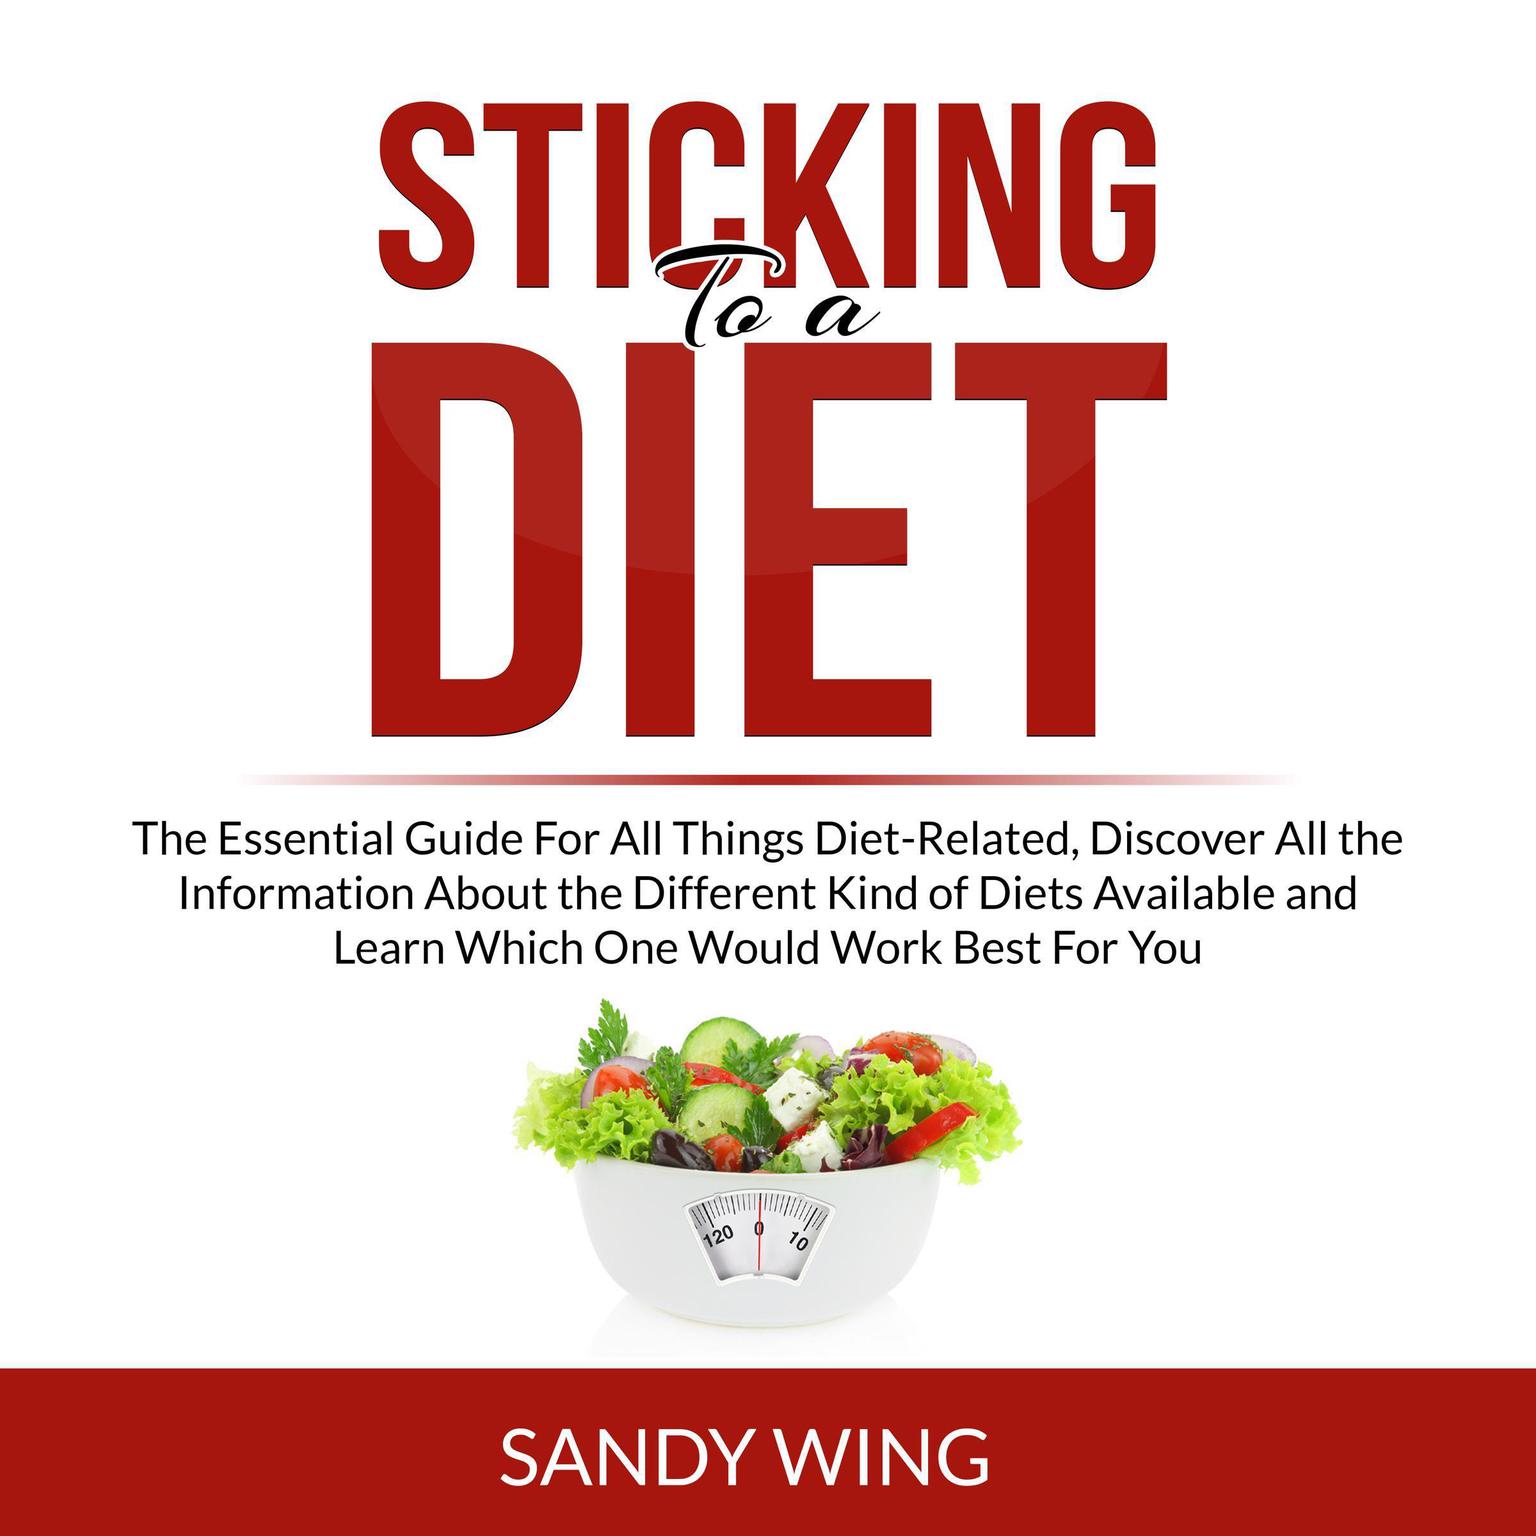 Sticking to a Diet: The Essential Guide For All Things Diet-Related, Discover All the Information About the Different Kind of Diets Available and Learn Which One Would Work Best For You Audiobook, by Sandy Wing